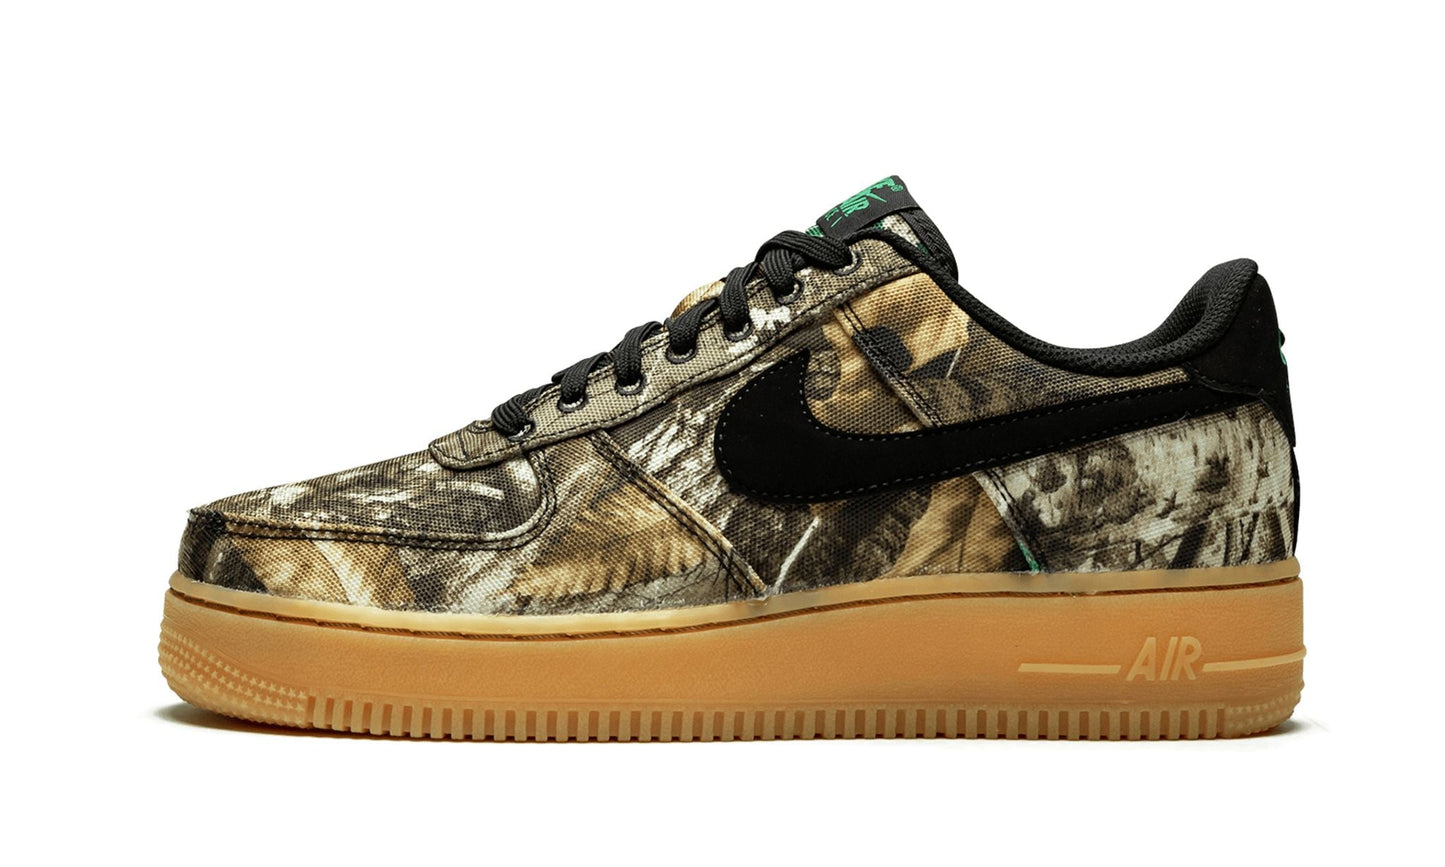 AIR FORCE 1 LOW "Realtree Camo"